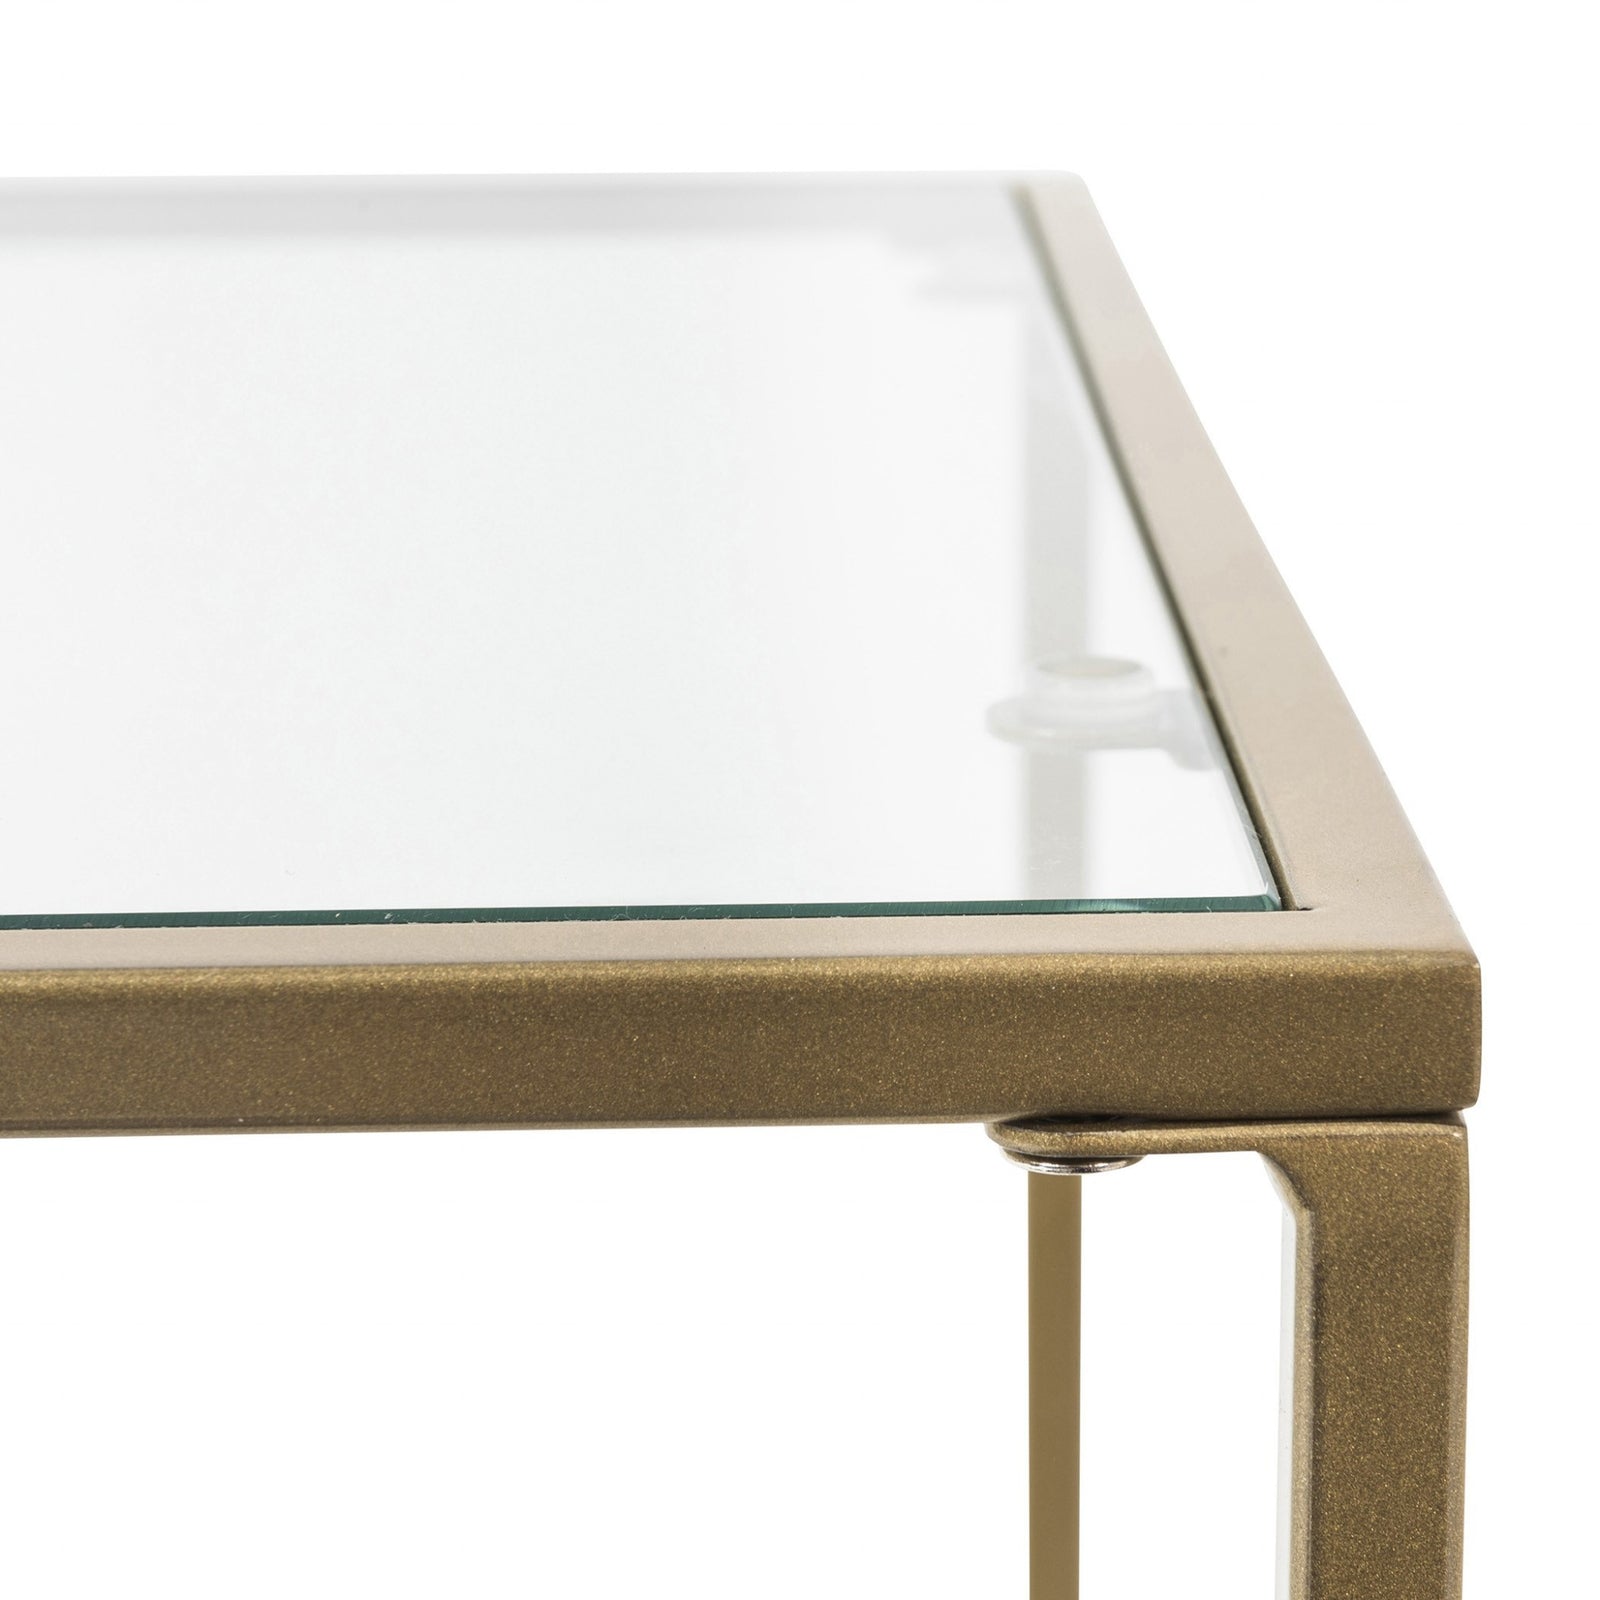 Minimalist Clear Glass and Gold Side Table